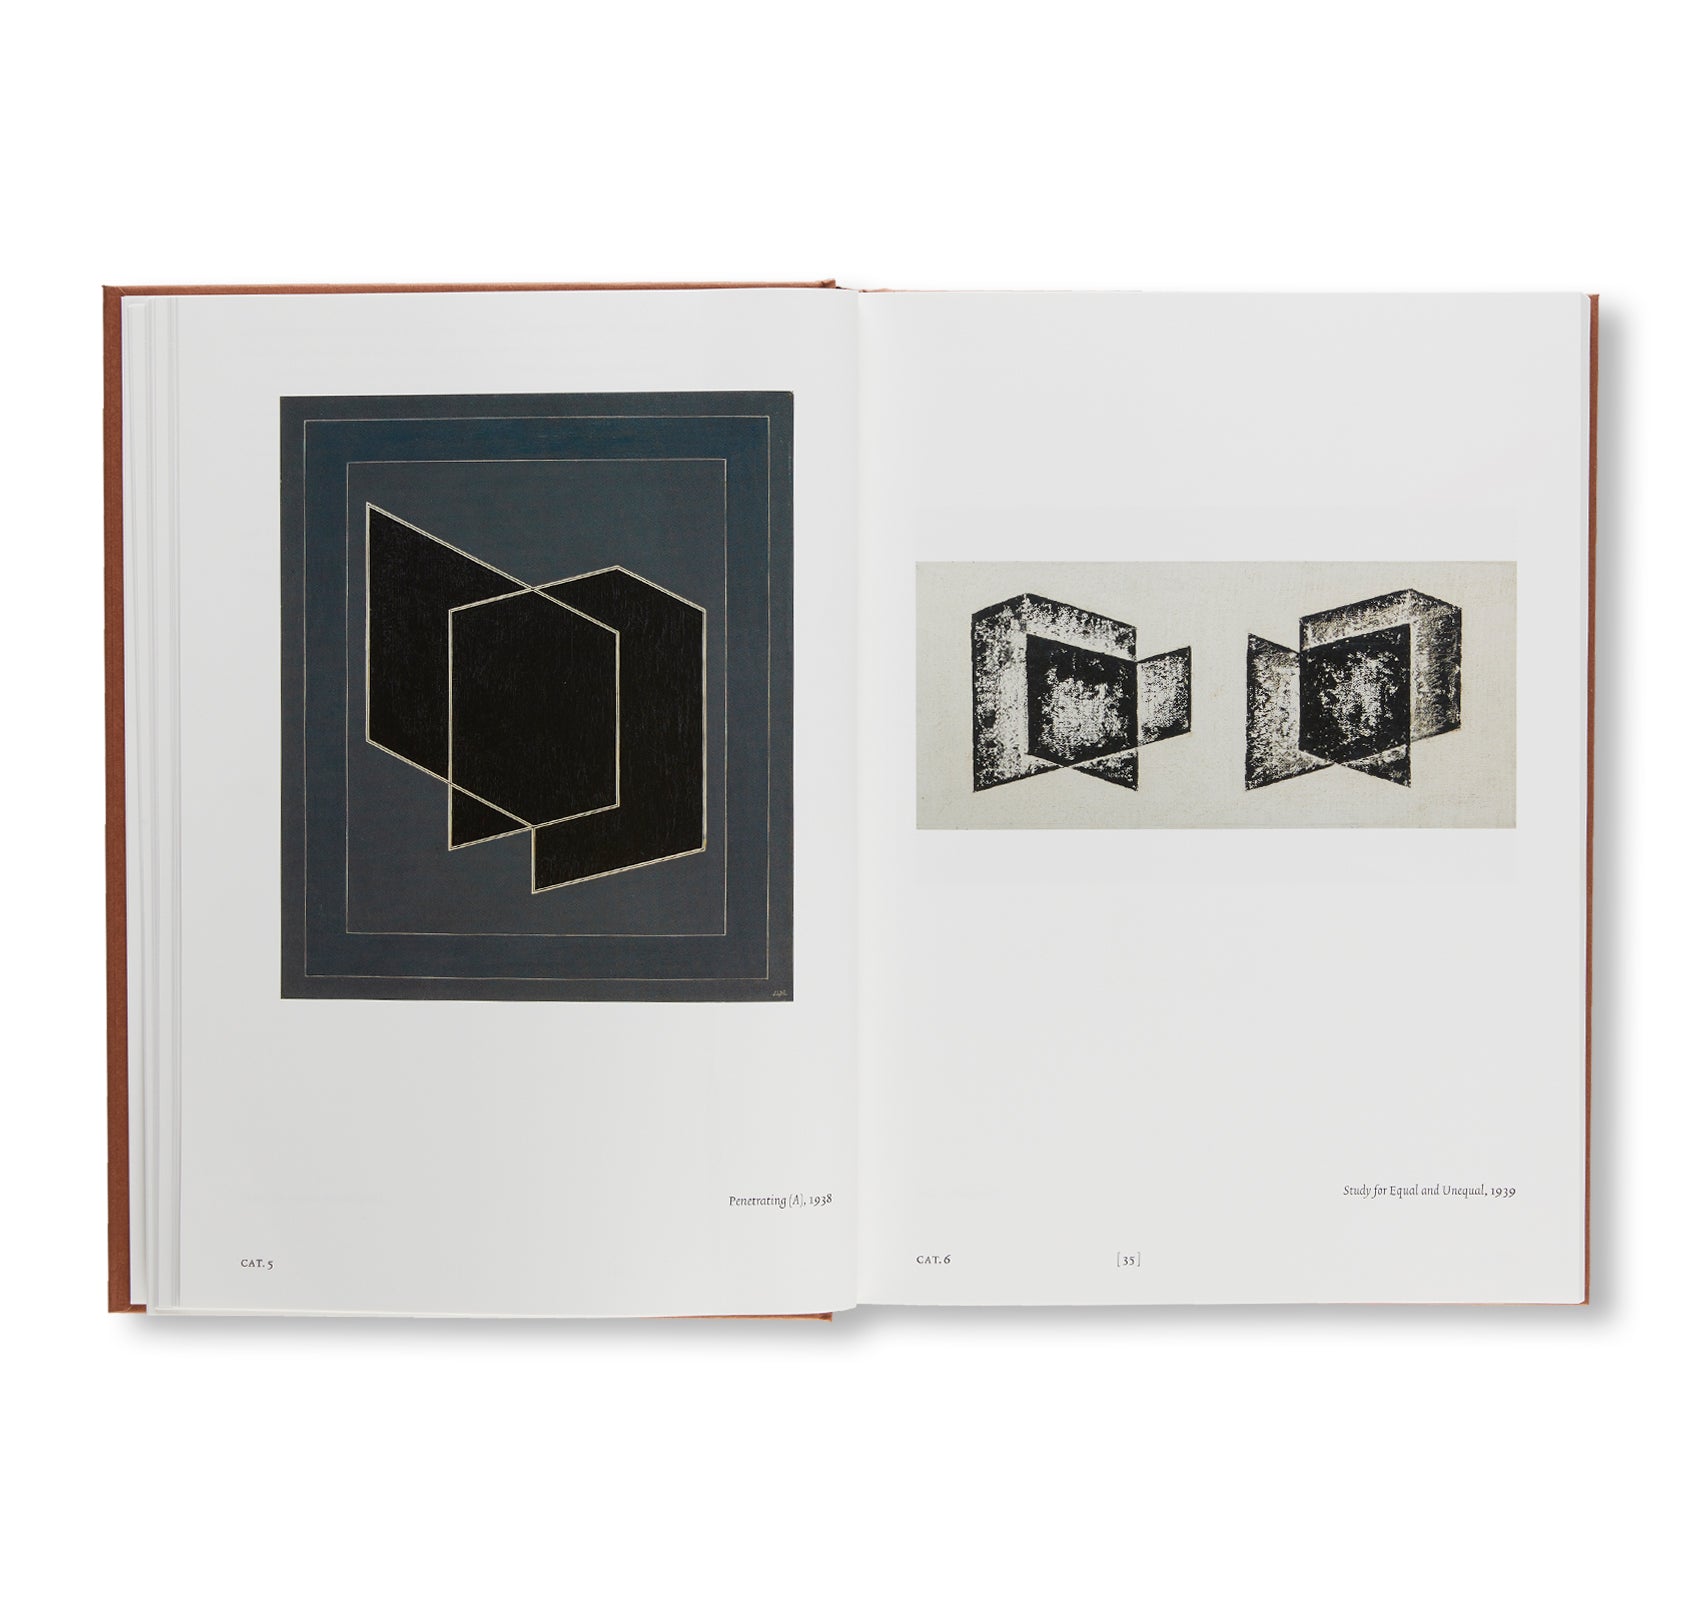 HOMAGE TO THE SQUARE by Josef Albers